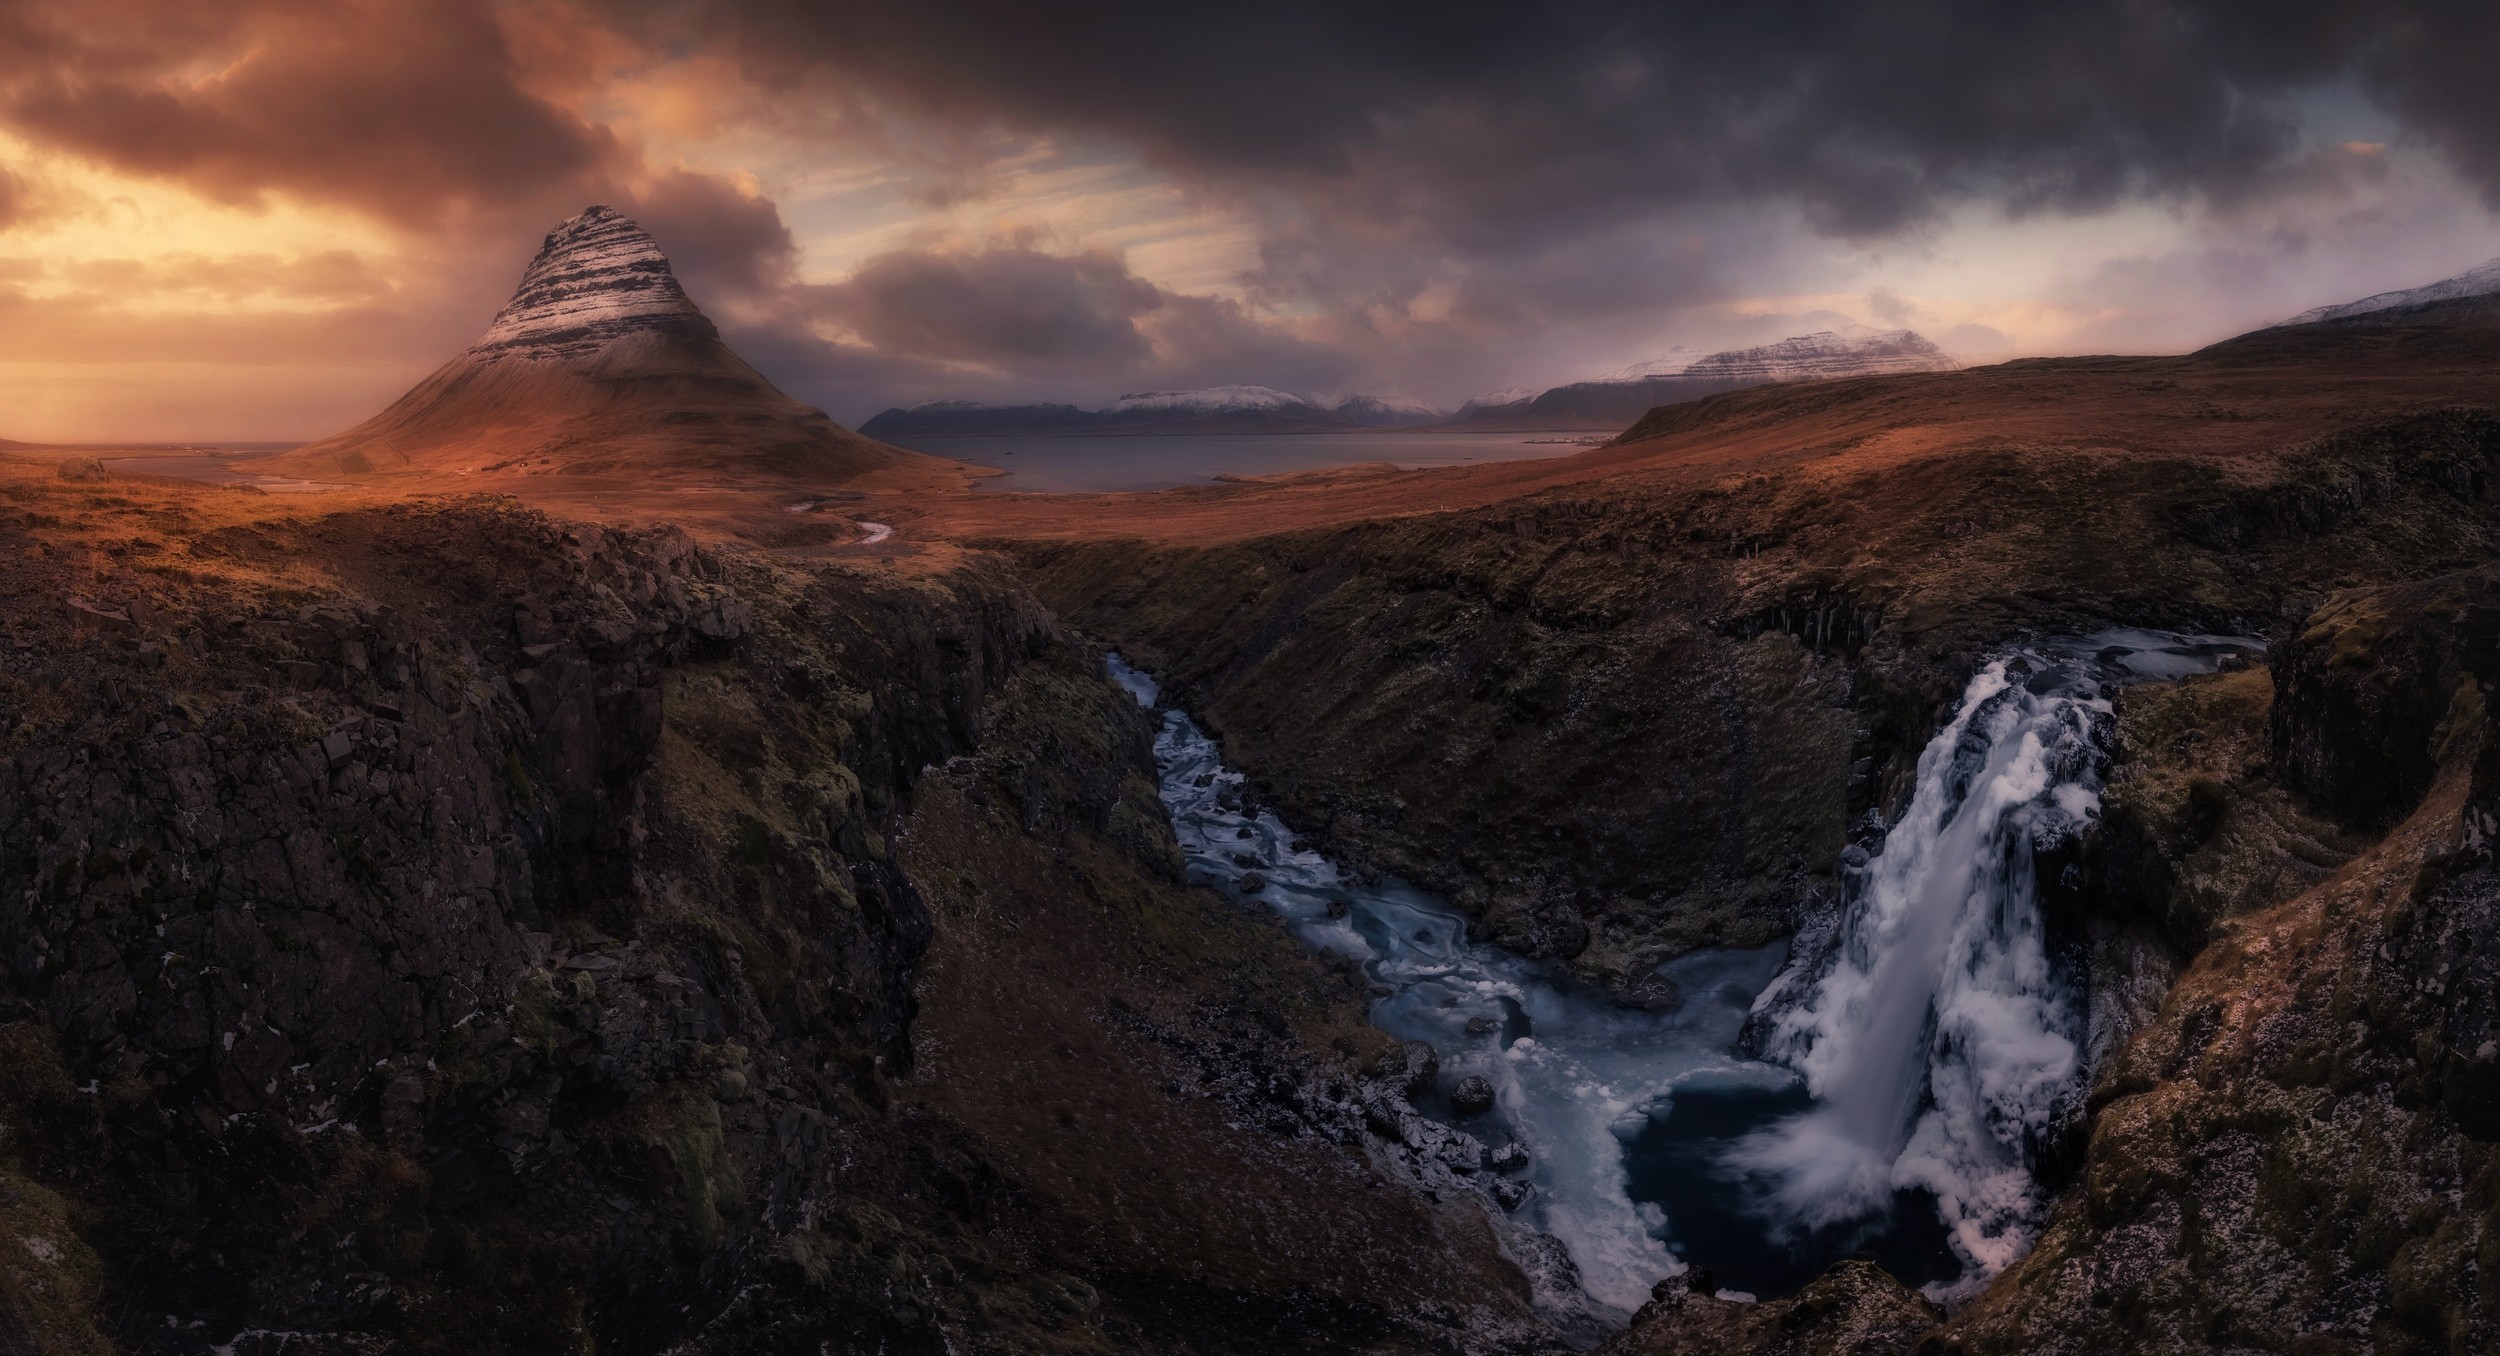 nature, Photography, Landscape, Mountains, Sunset, Waterfall, River, Clouds, Road, Snowy peak, Iceland Wallpaper